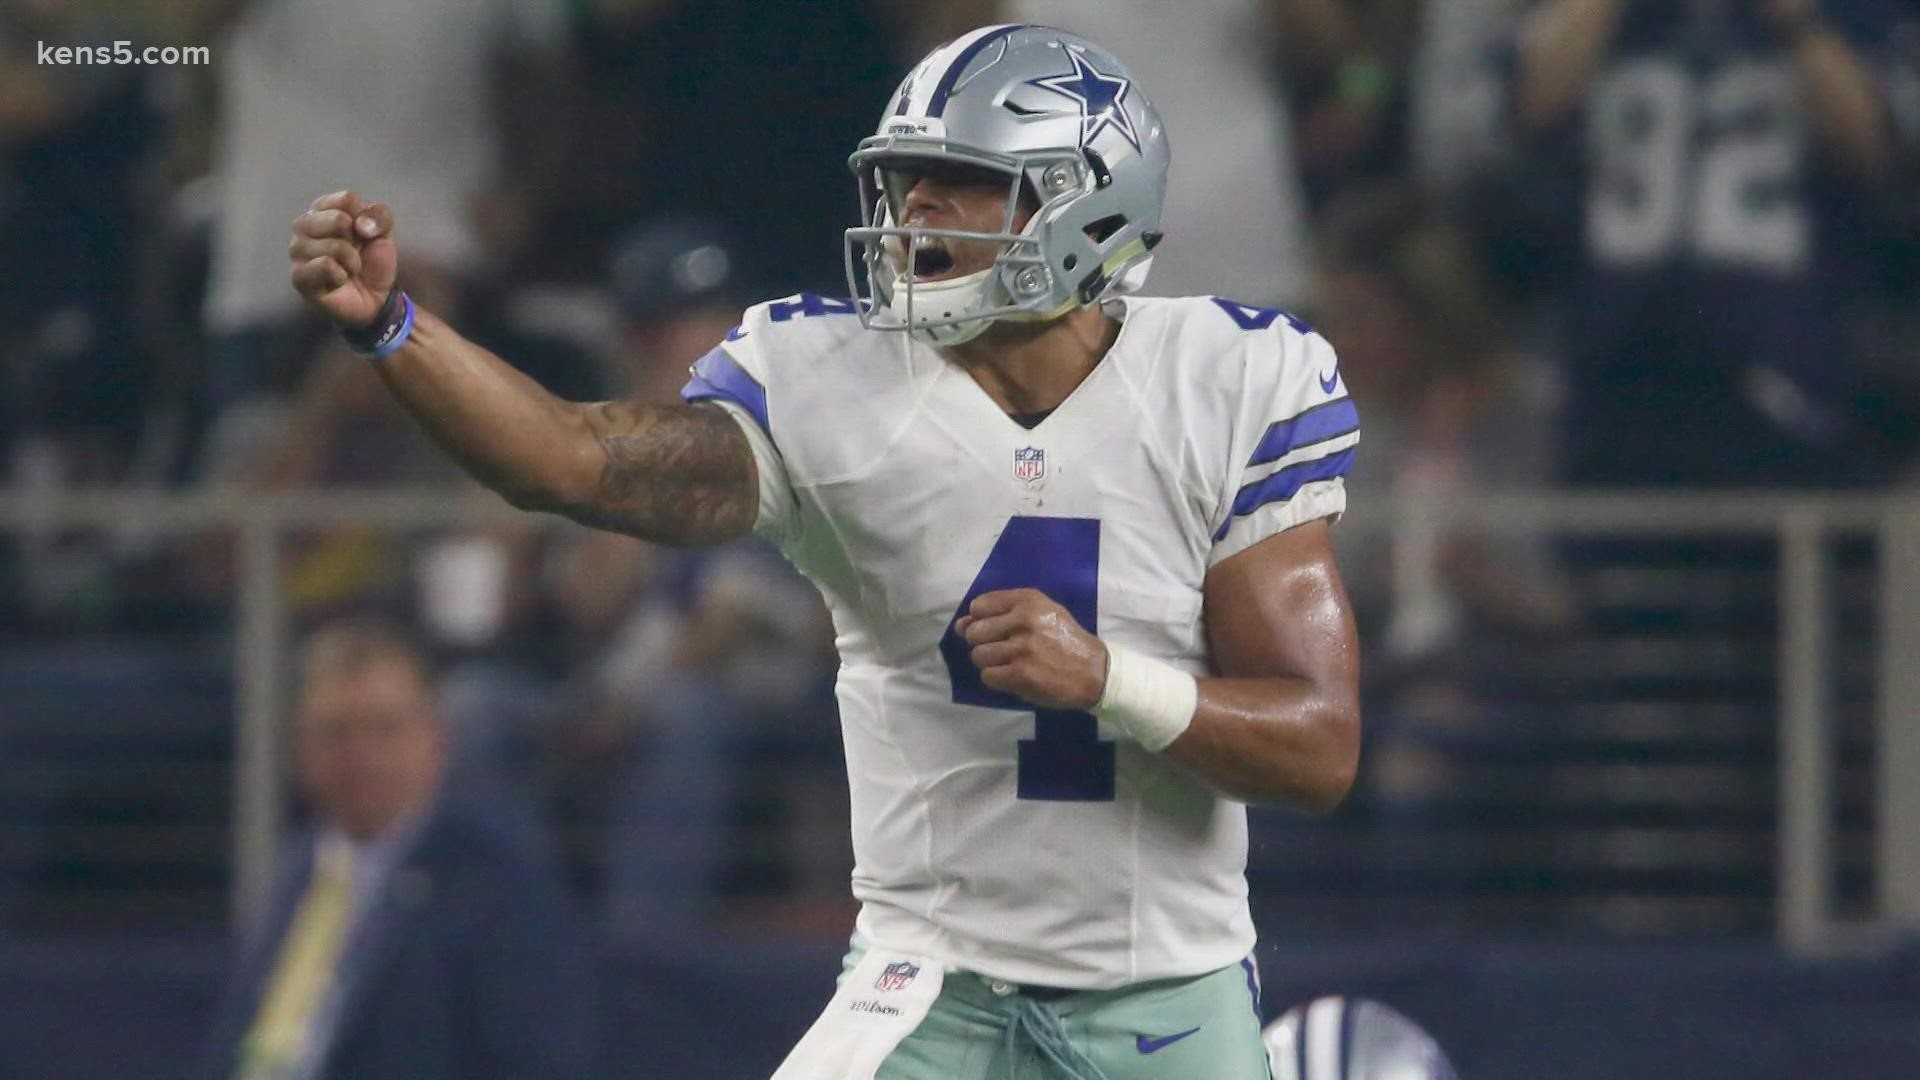 The Cowboys QB is liking what he sees out of Dallas's young players in training camp.